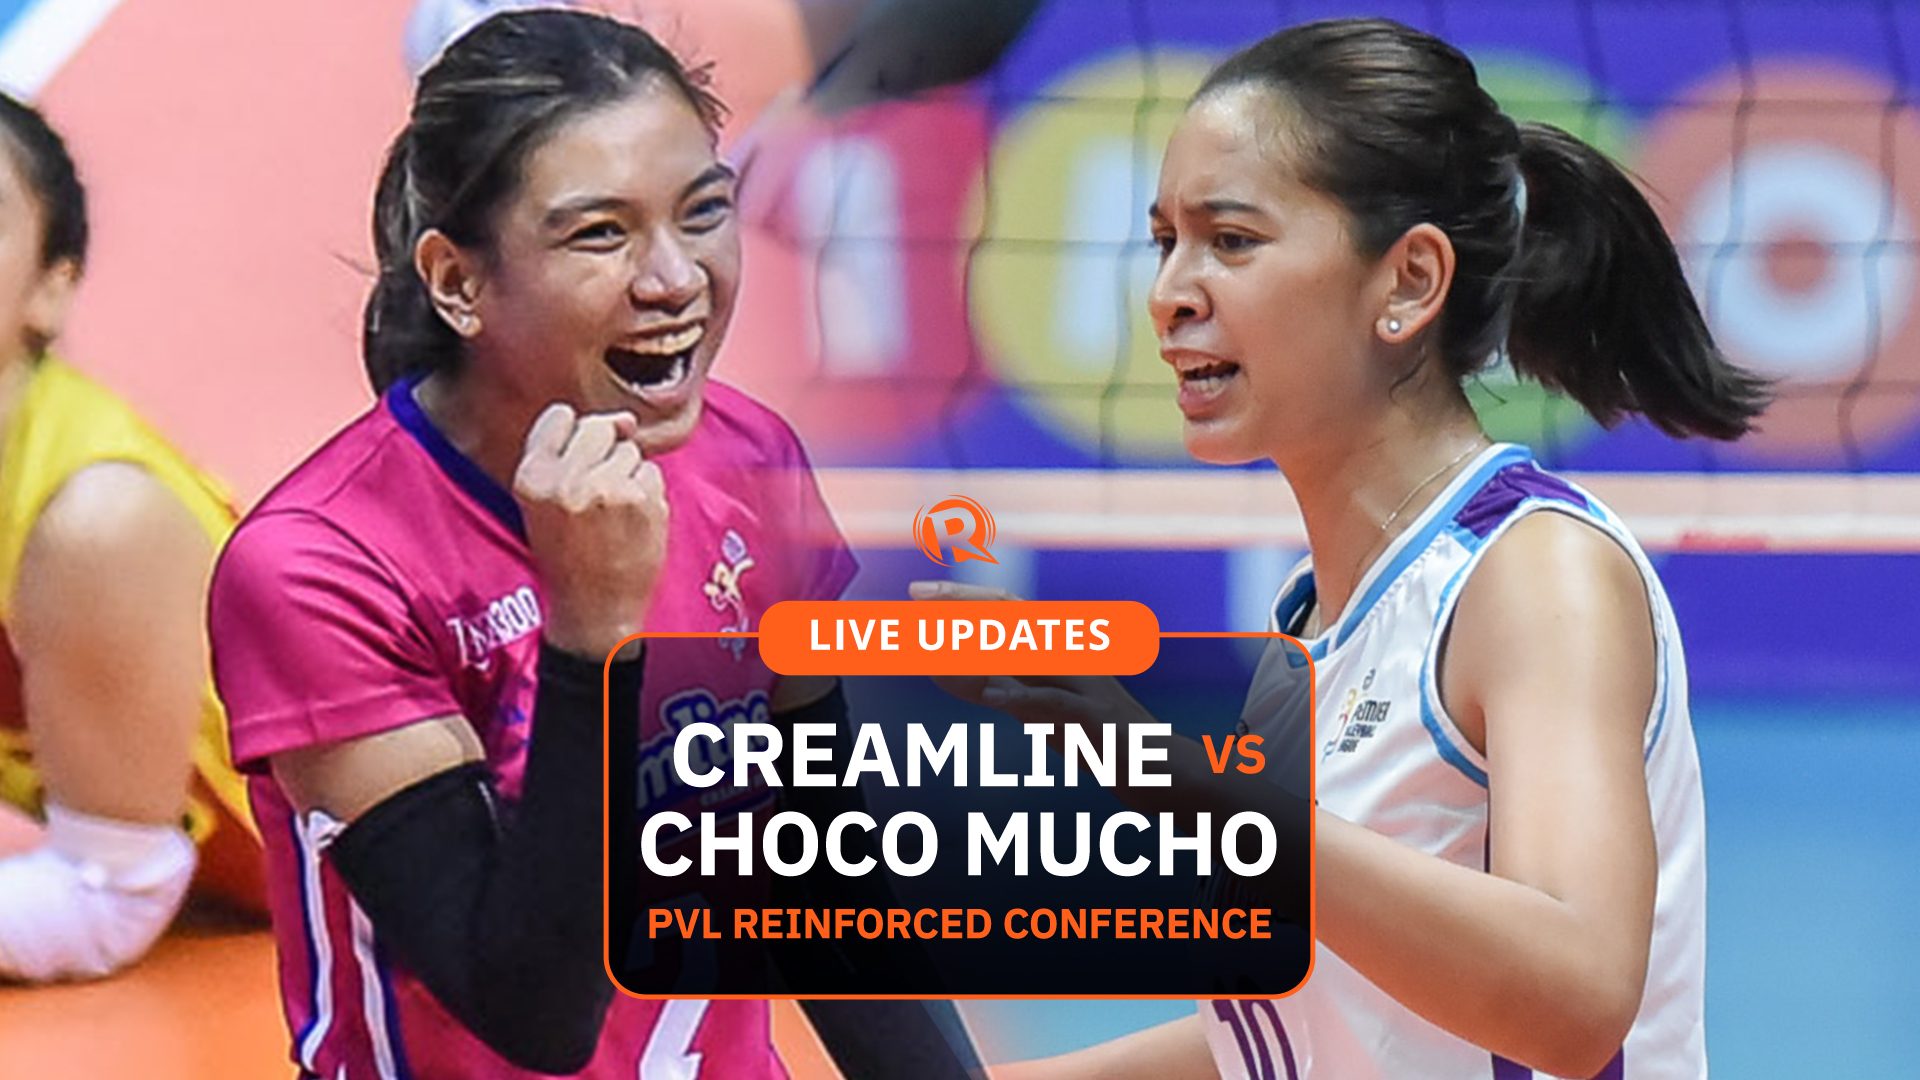 HIGHLIGHTS PVL Reinforced Conference Creamline vs Choco Mucho